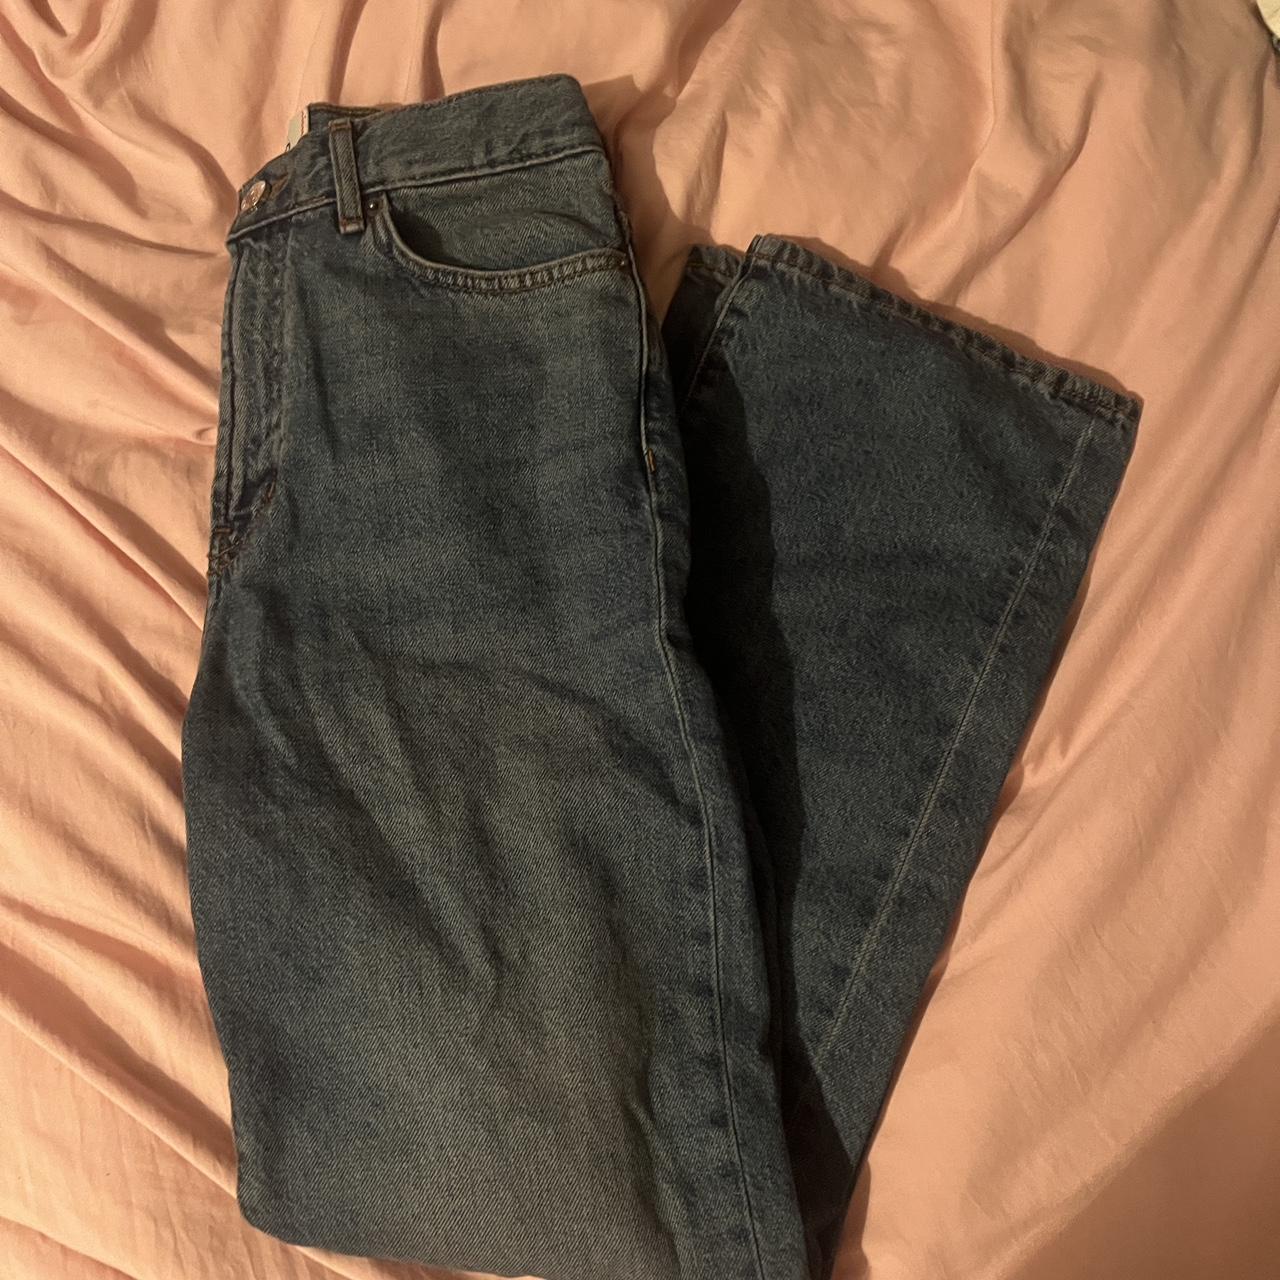 Urban Outfitters Women's Navy and Blue Jeans